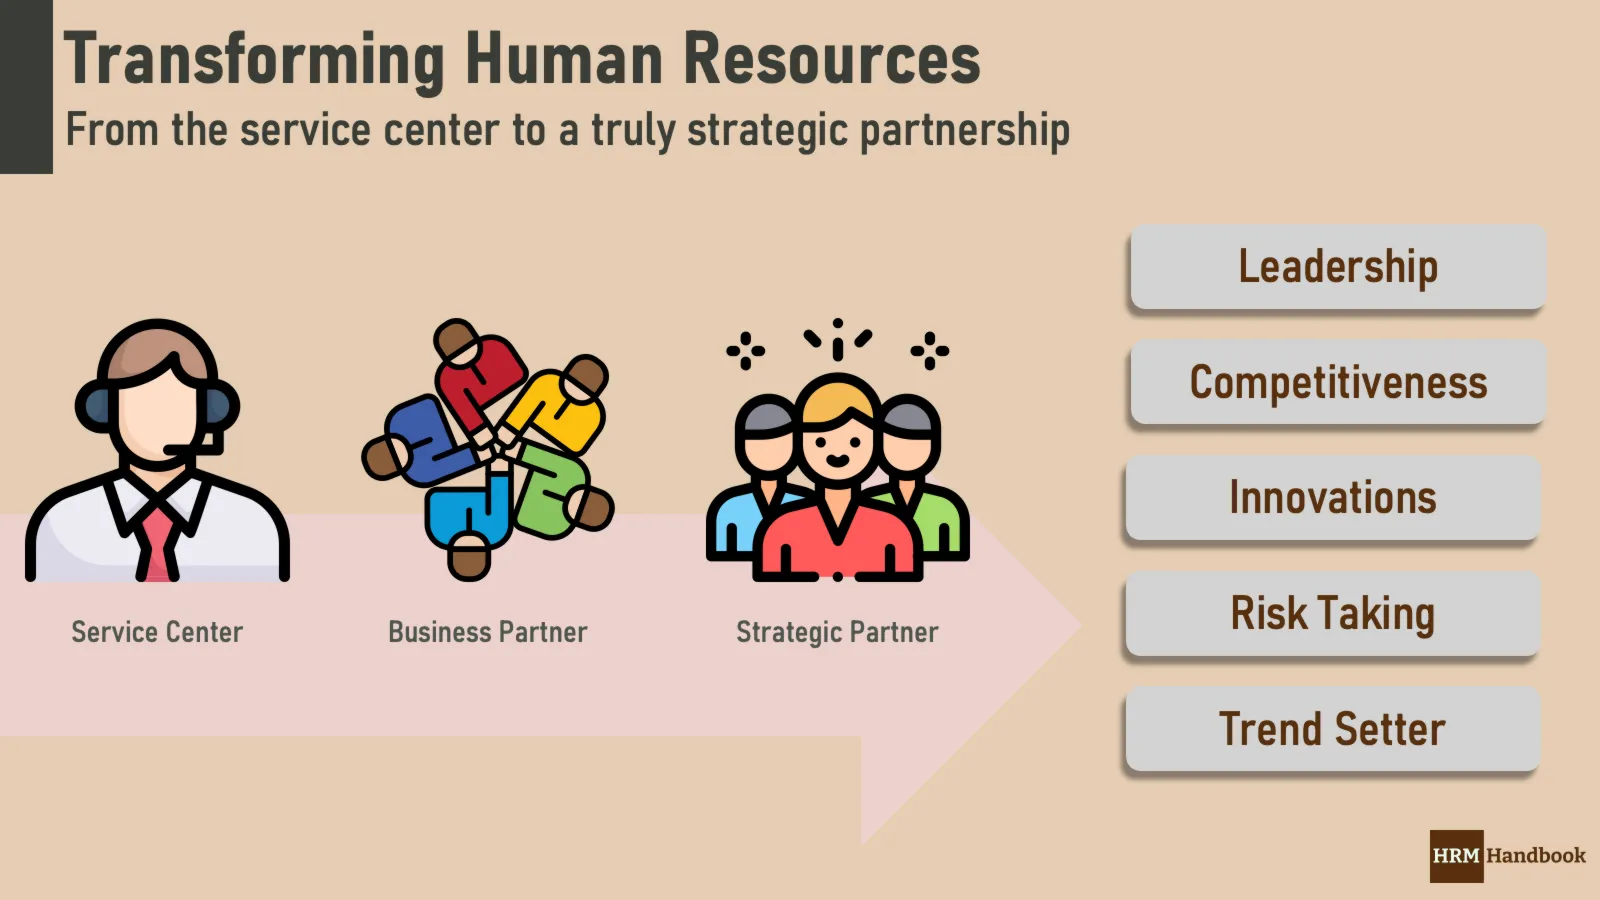 Transforming Human Resources into a true strategic partner which cares about Innovations, Competitiveness, Leadership and other points from the business agenda.